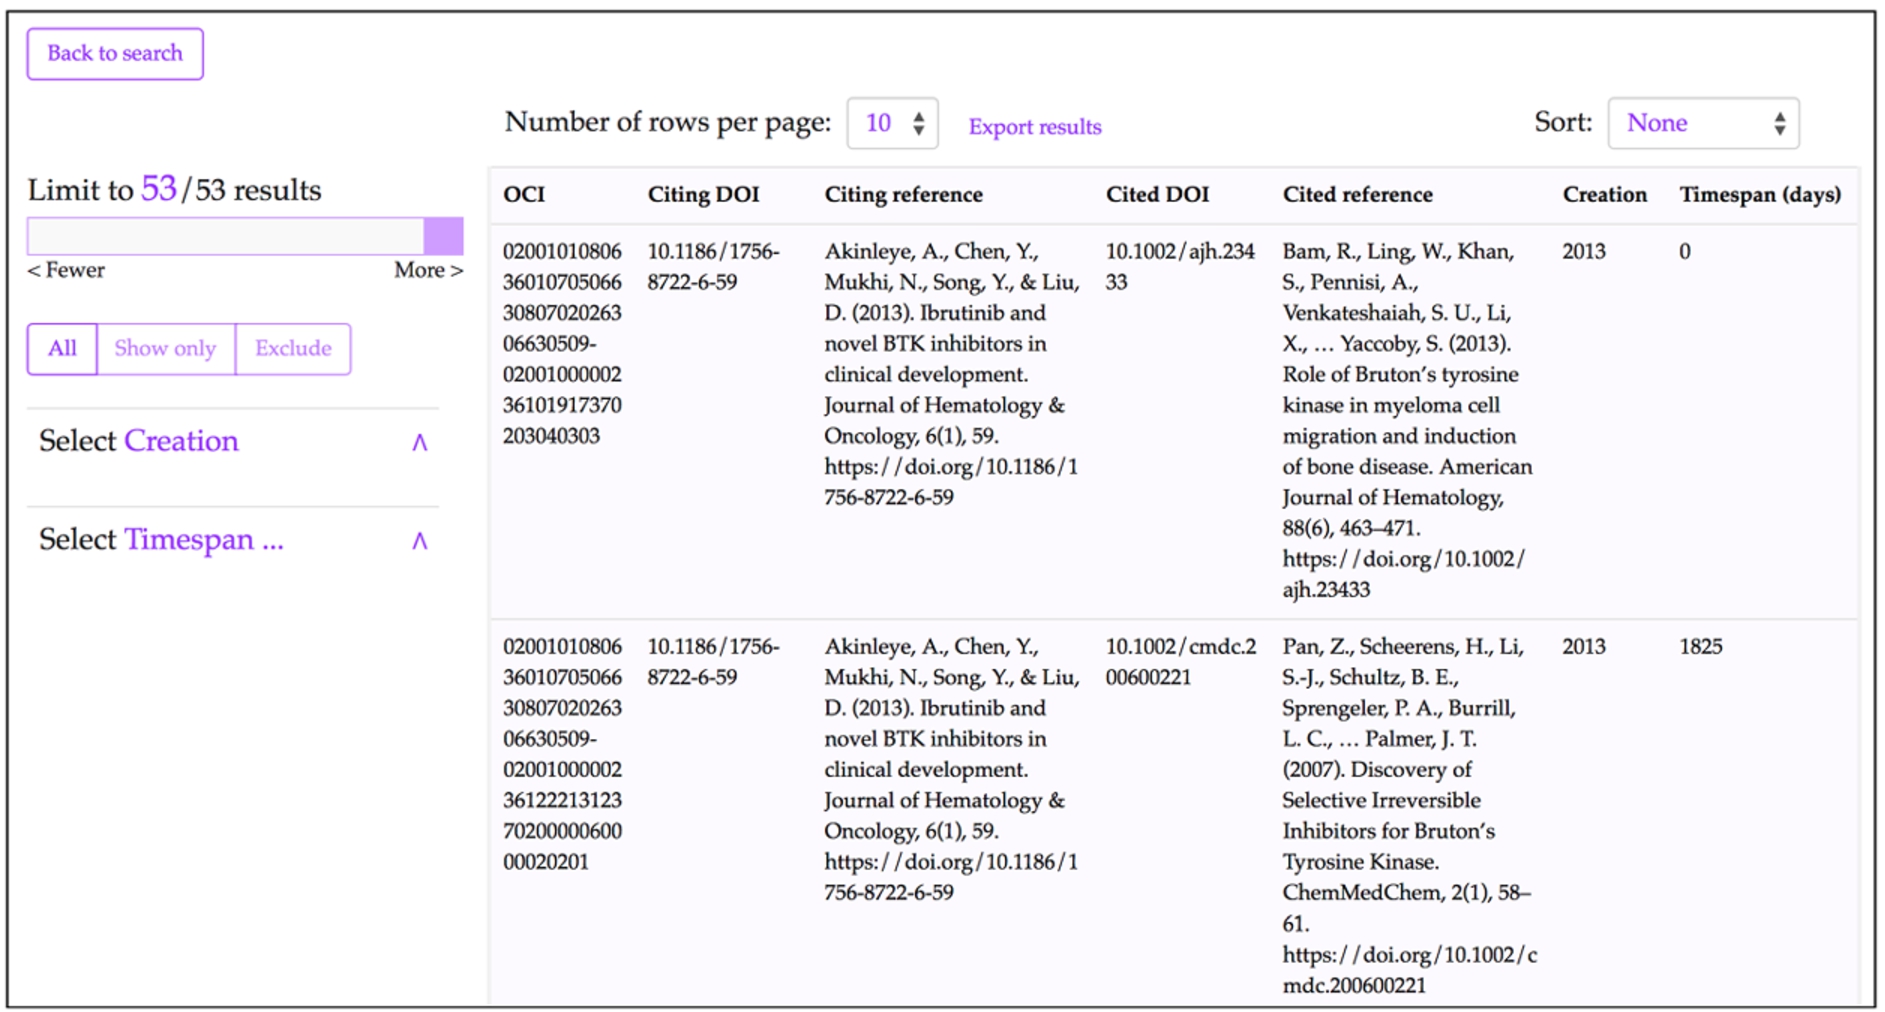 The results interface for COCI in the OpenCitations OSCAR website after using its advanced search option and executing a query to look for all the resources (citation entities) having the value ‘10.1186/1756-8722-6-59’ as citing DOI – http://opencitations.net/index/coci/search?text=10.1186%2F1756-8722-6-59&rule=citingdoi.